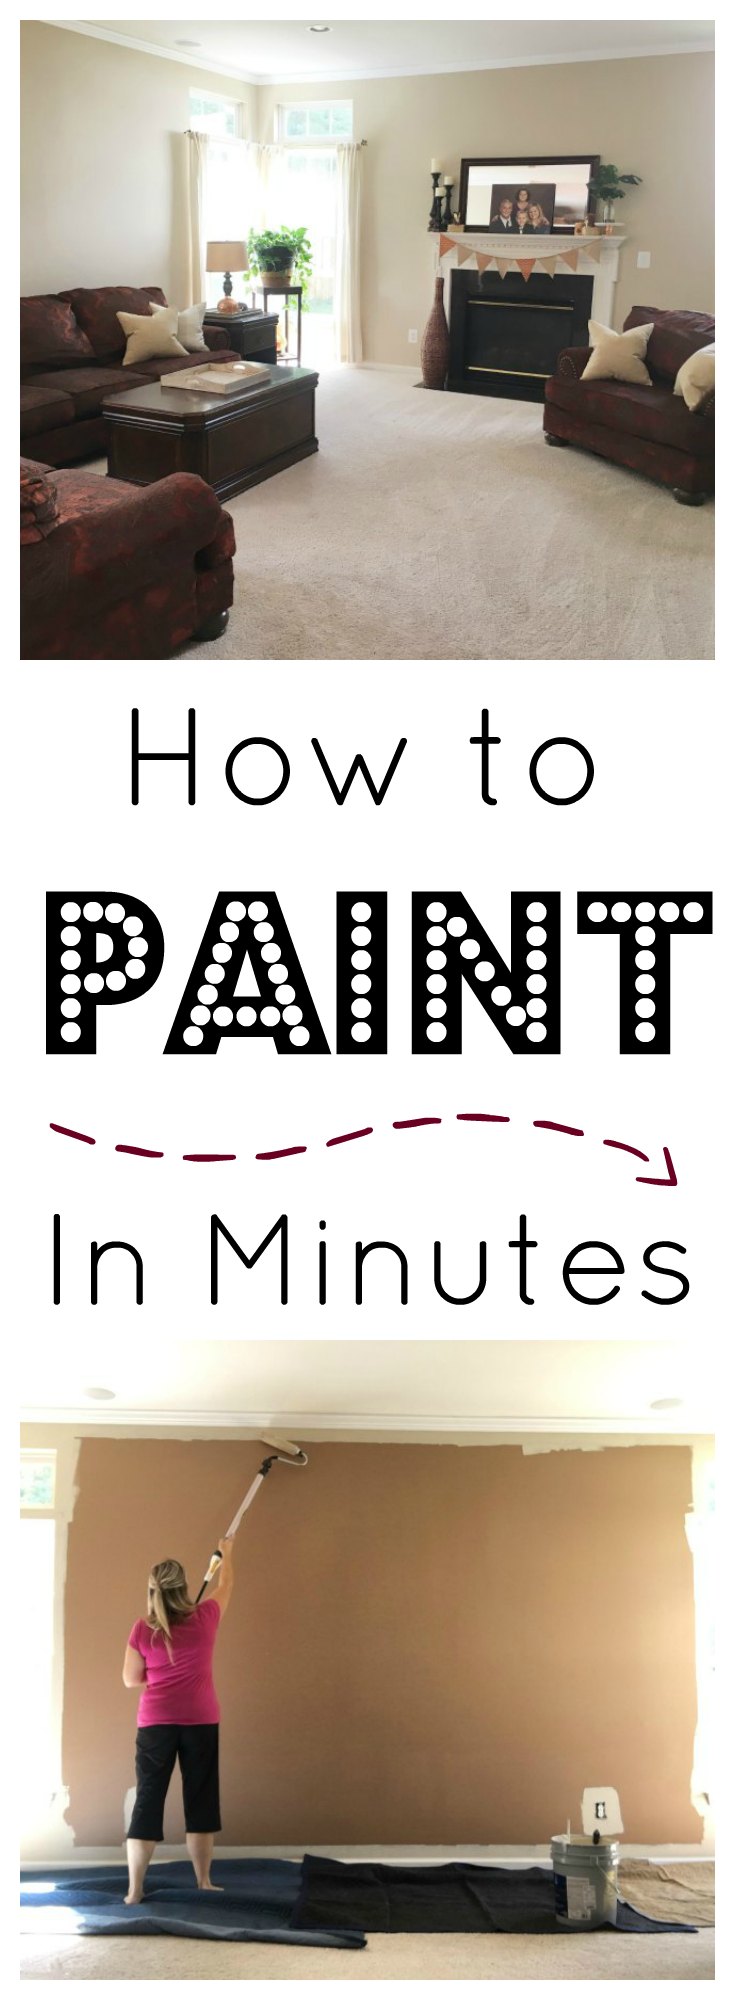 how to paint a room before and after how to paint in minutes on www.sugarbananas.com with sherwin williams and wagner smart paint roller